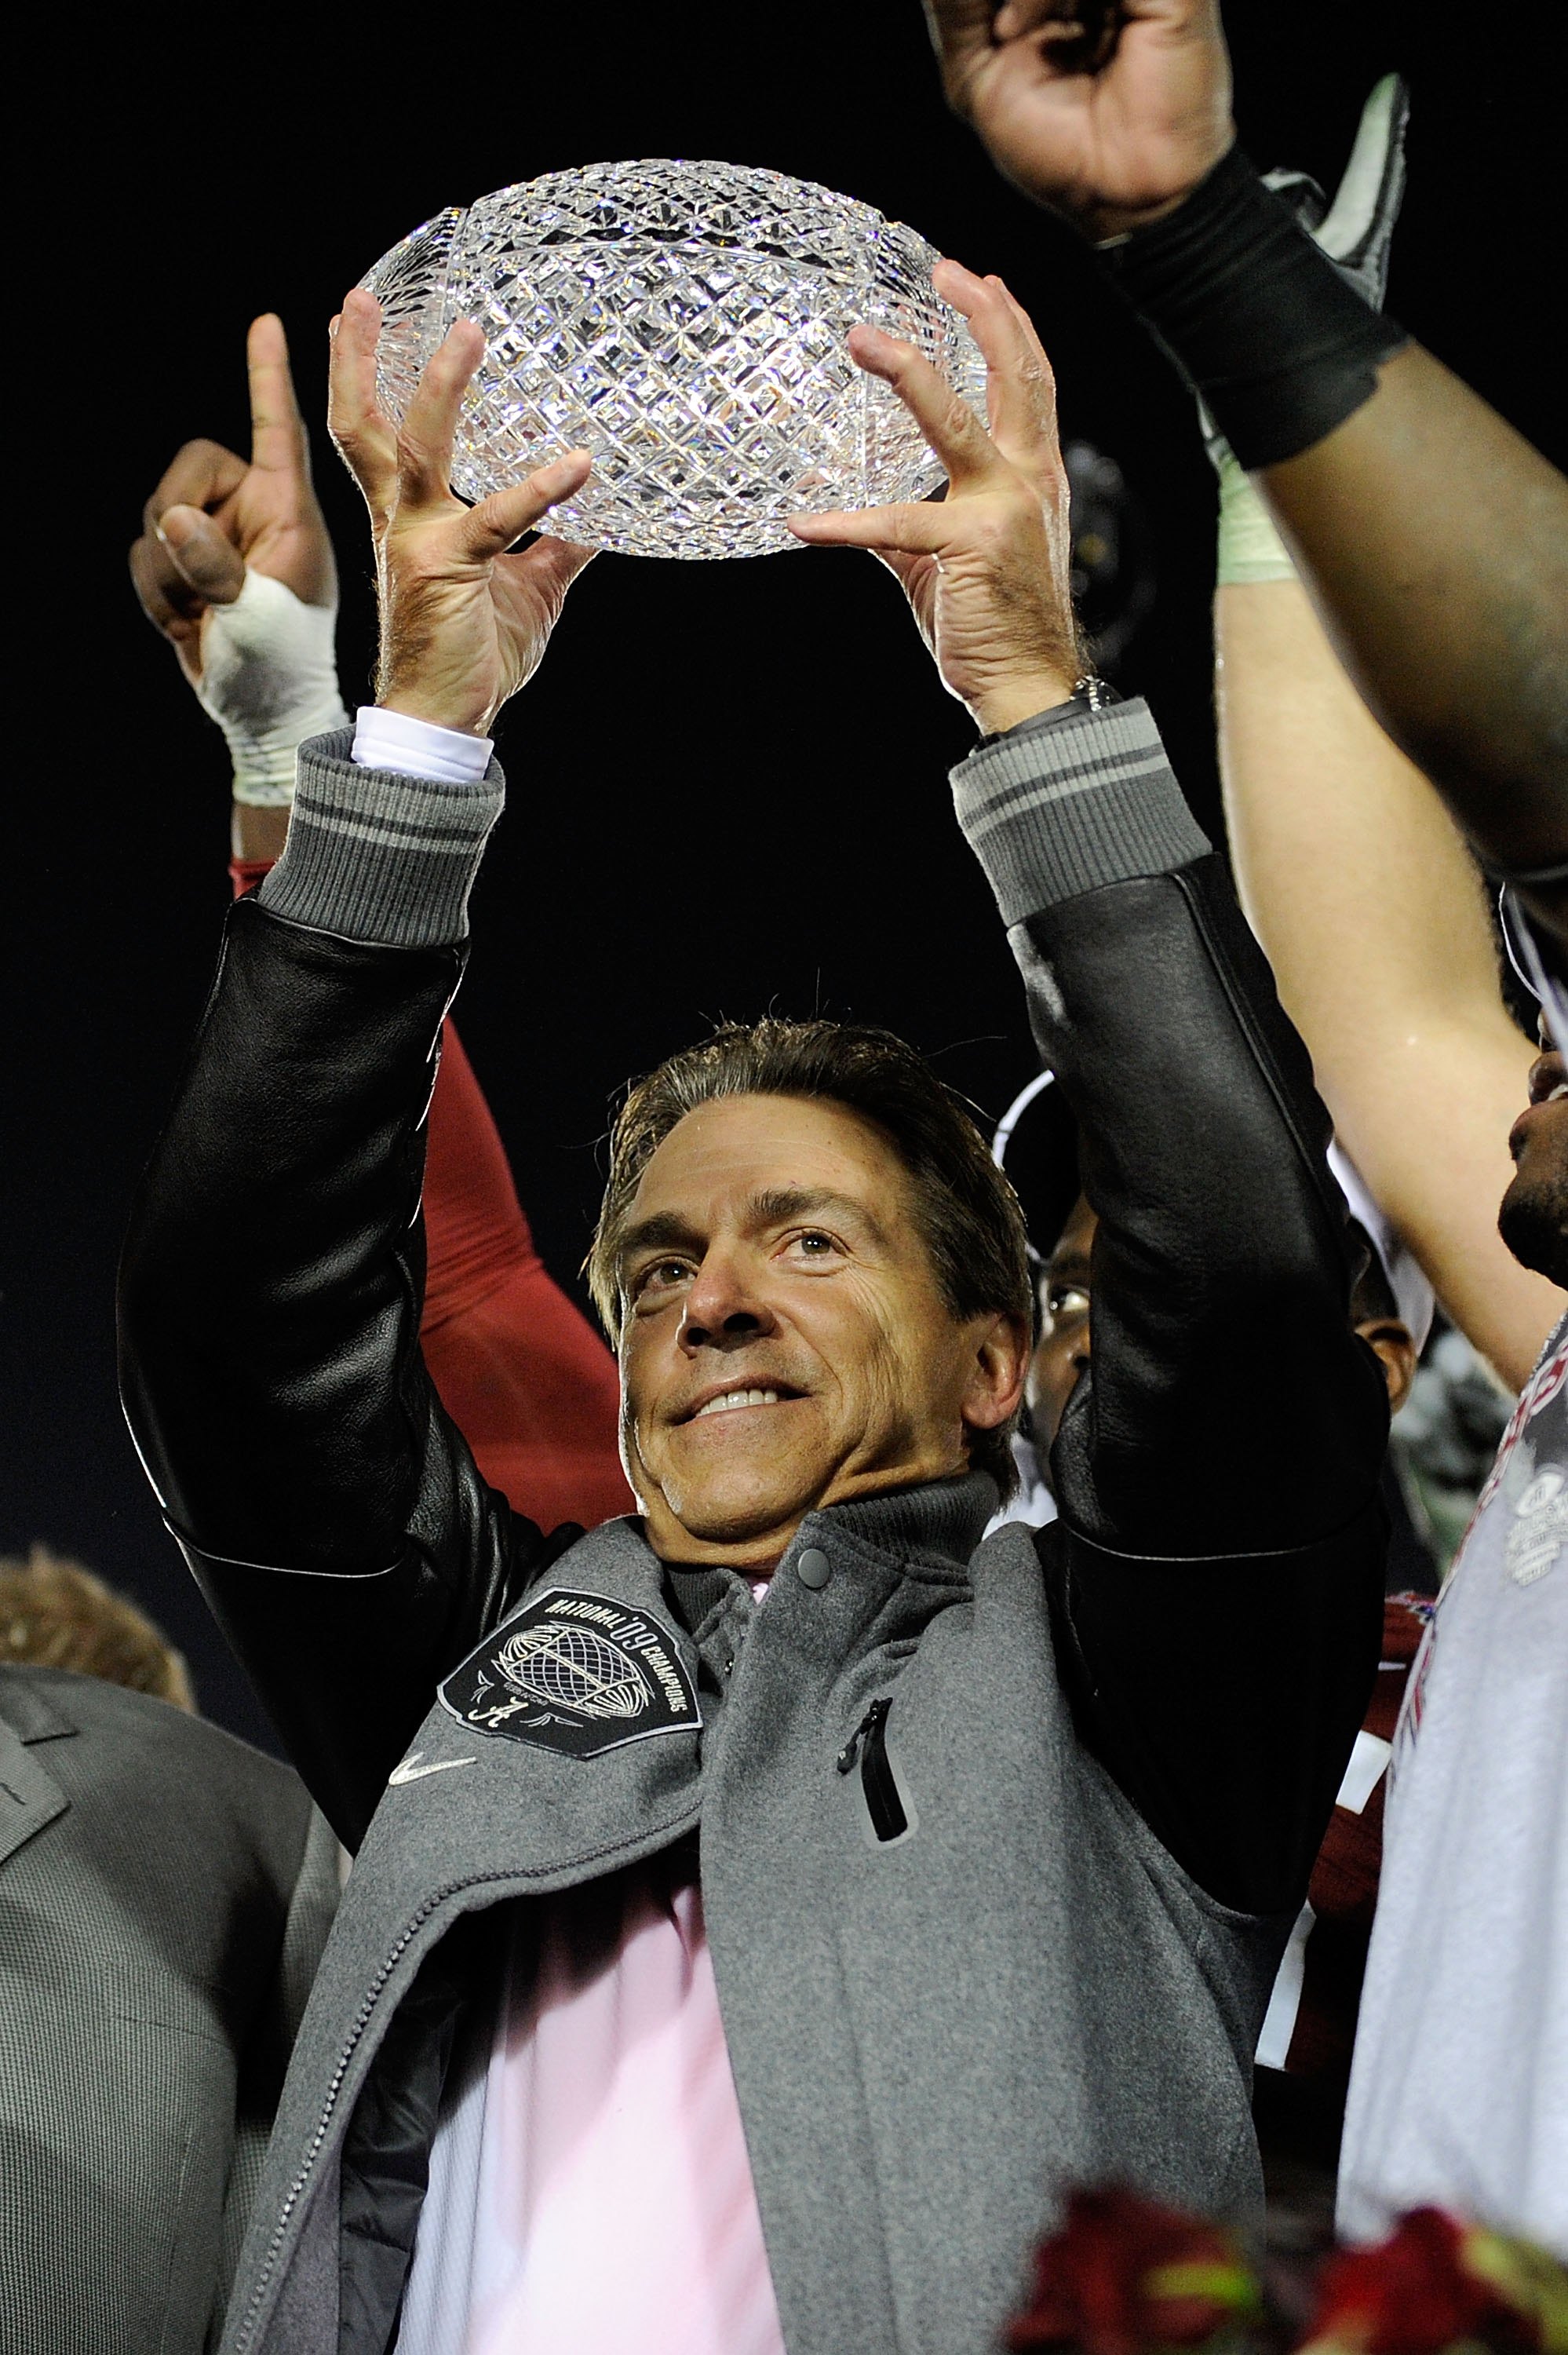 PASADENA, CA - JANUARY 07:  Head coach Nick Saban and the Alabama Crimson Tide celebrate with the BCS Championship trophy after winning the Citi BCS National Championship game over the Texas Longhorns at the Rose Bowl on January 7, 2010 in Pasadena, Calif